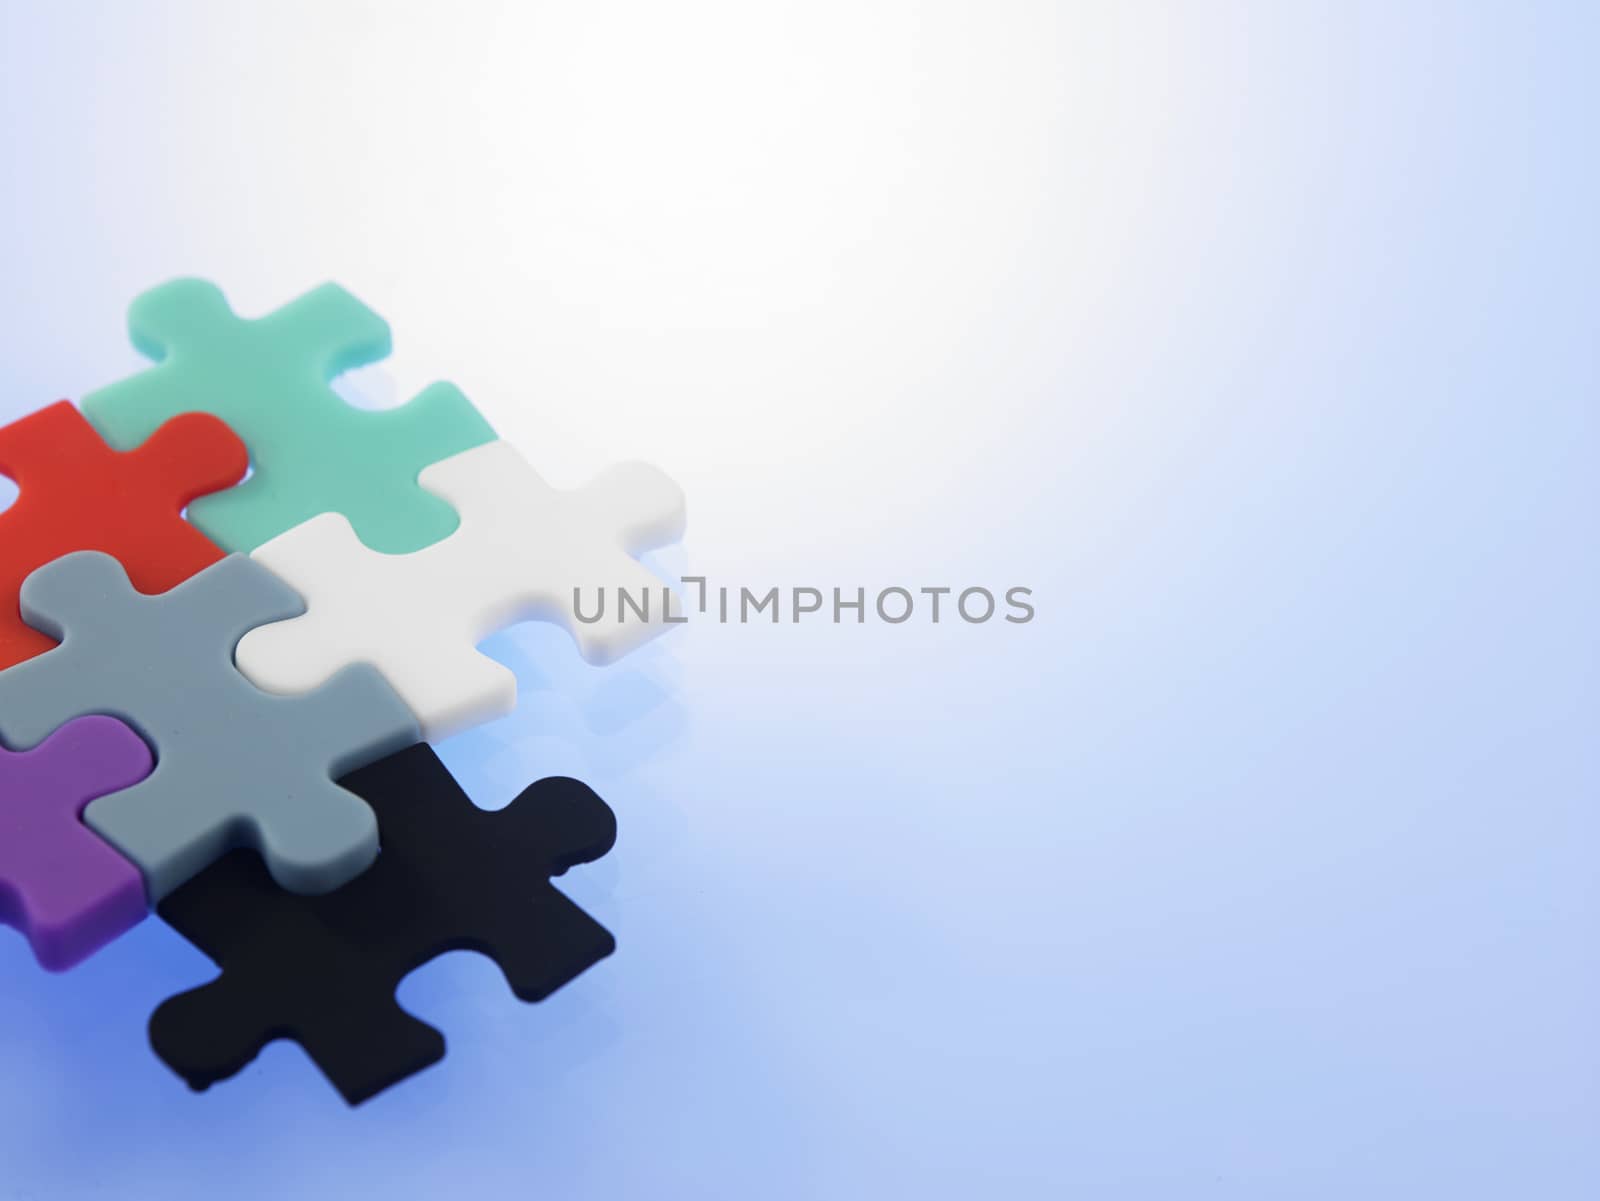 Business Teamwork Concept by Jigsaw Puzzle Pieces

